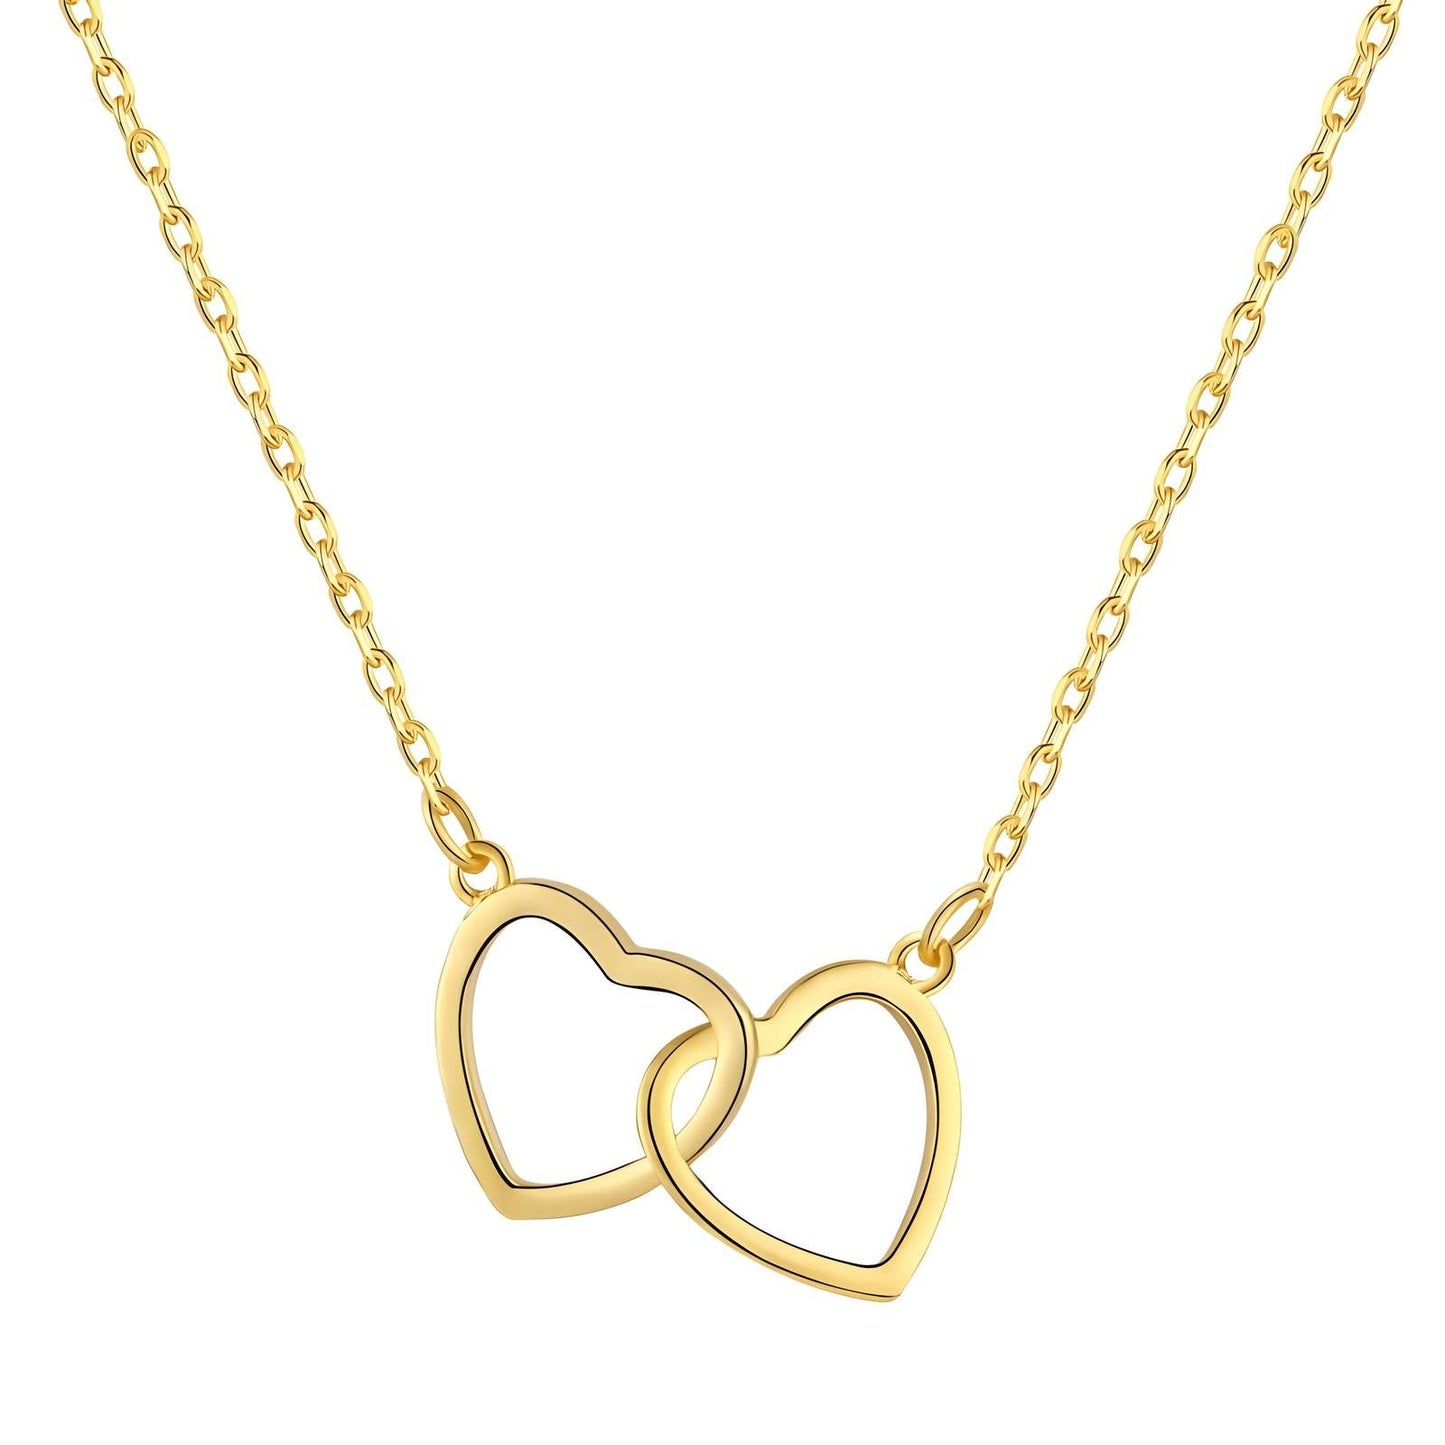 Two hearts are better than one - Gold Plated Tarnish Free Jewellery